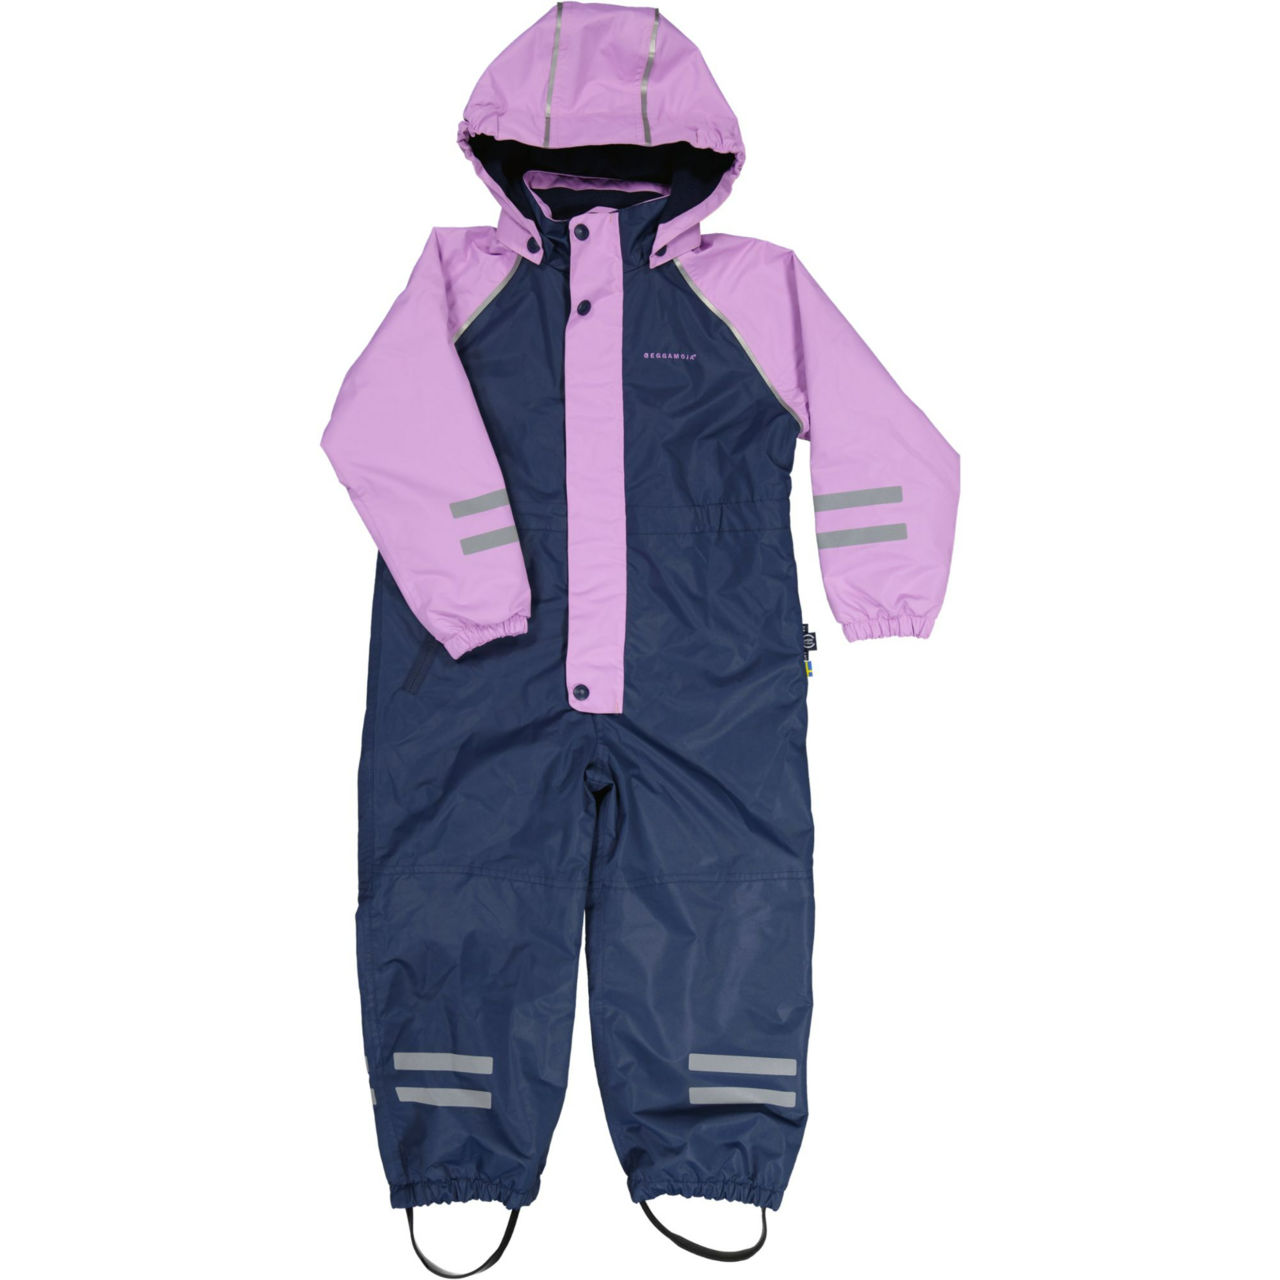 Shell overall Violet 86/92